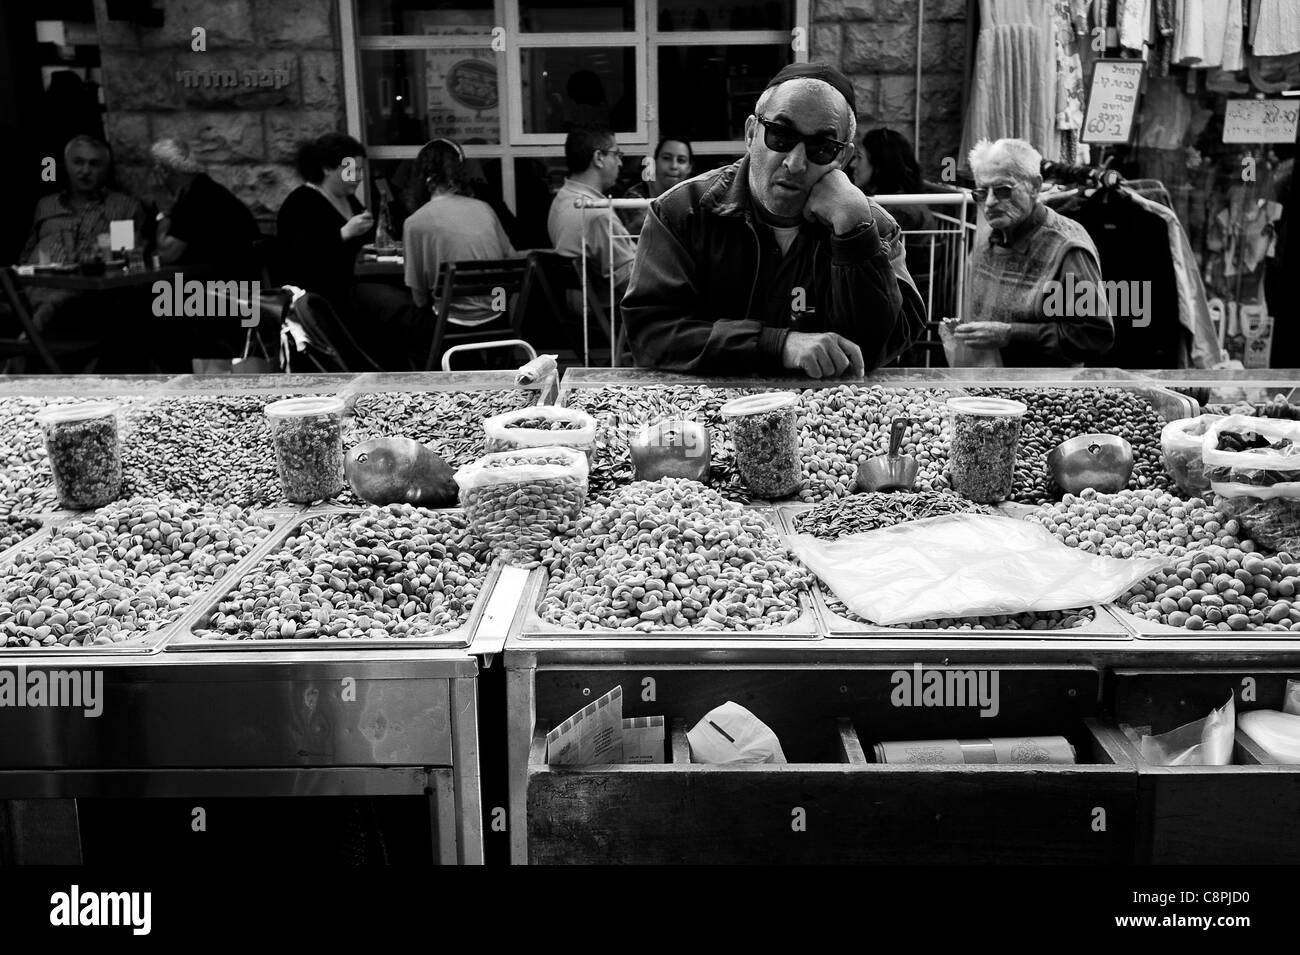 Standing in front of a spice stand in the market, dreaming with sunglasses. Stock Photo